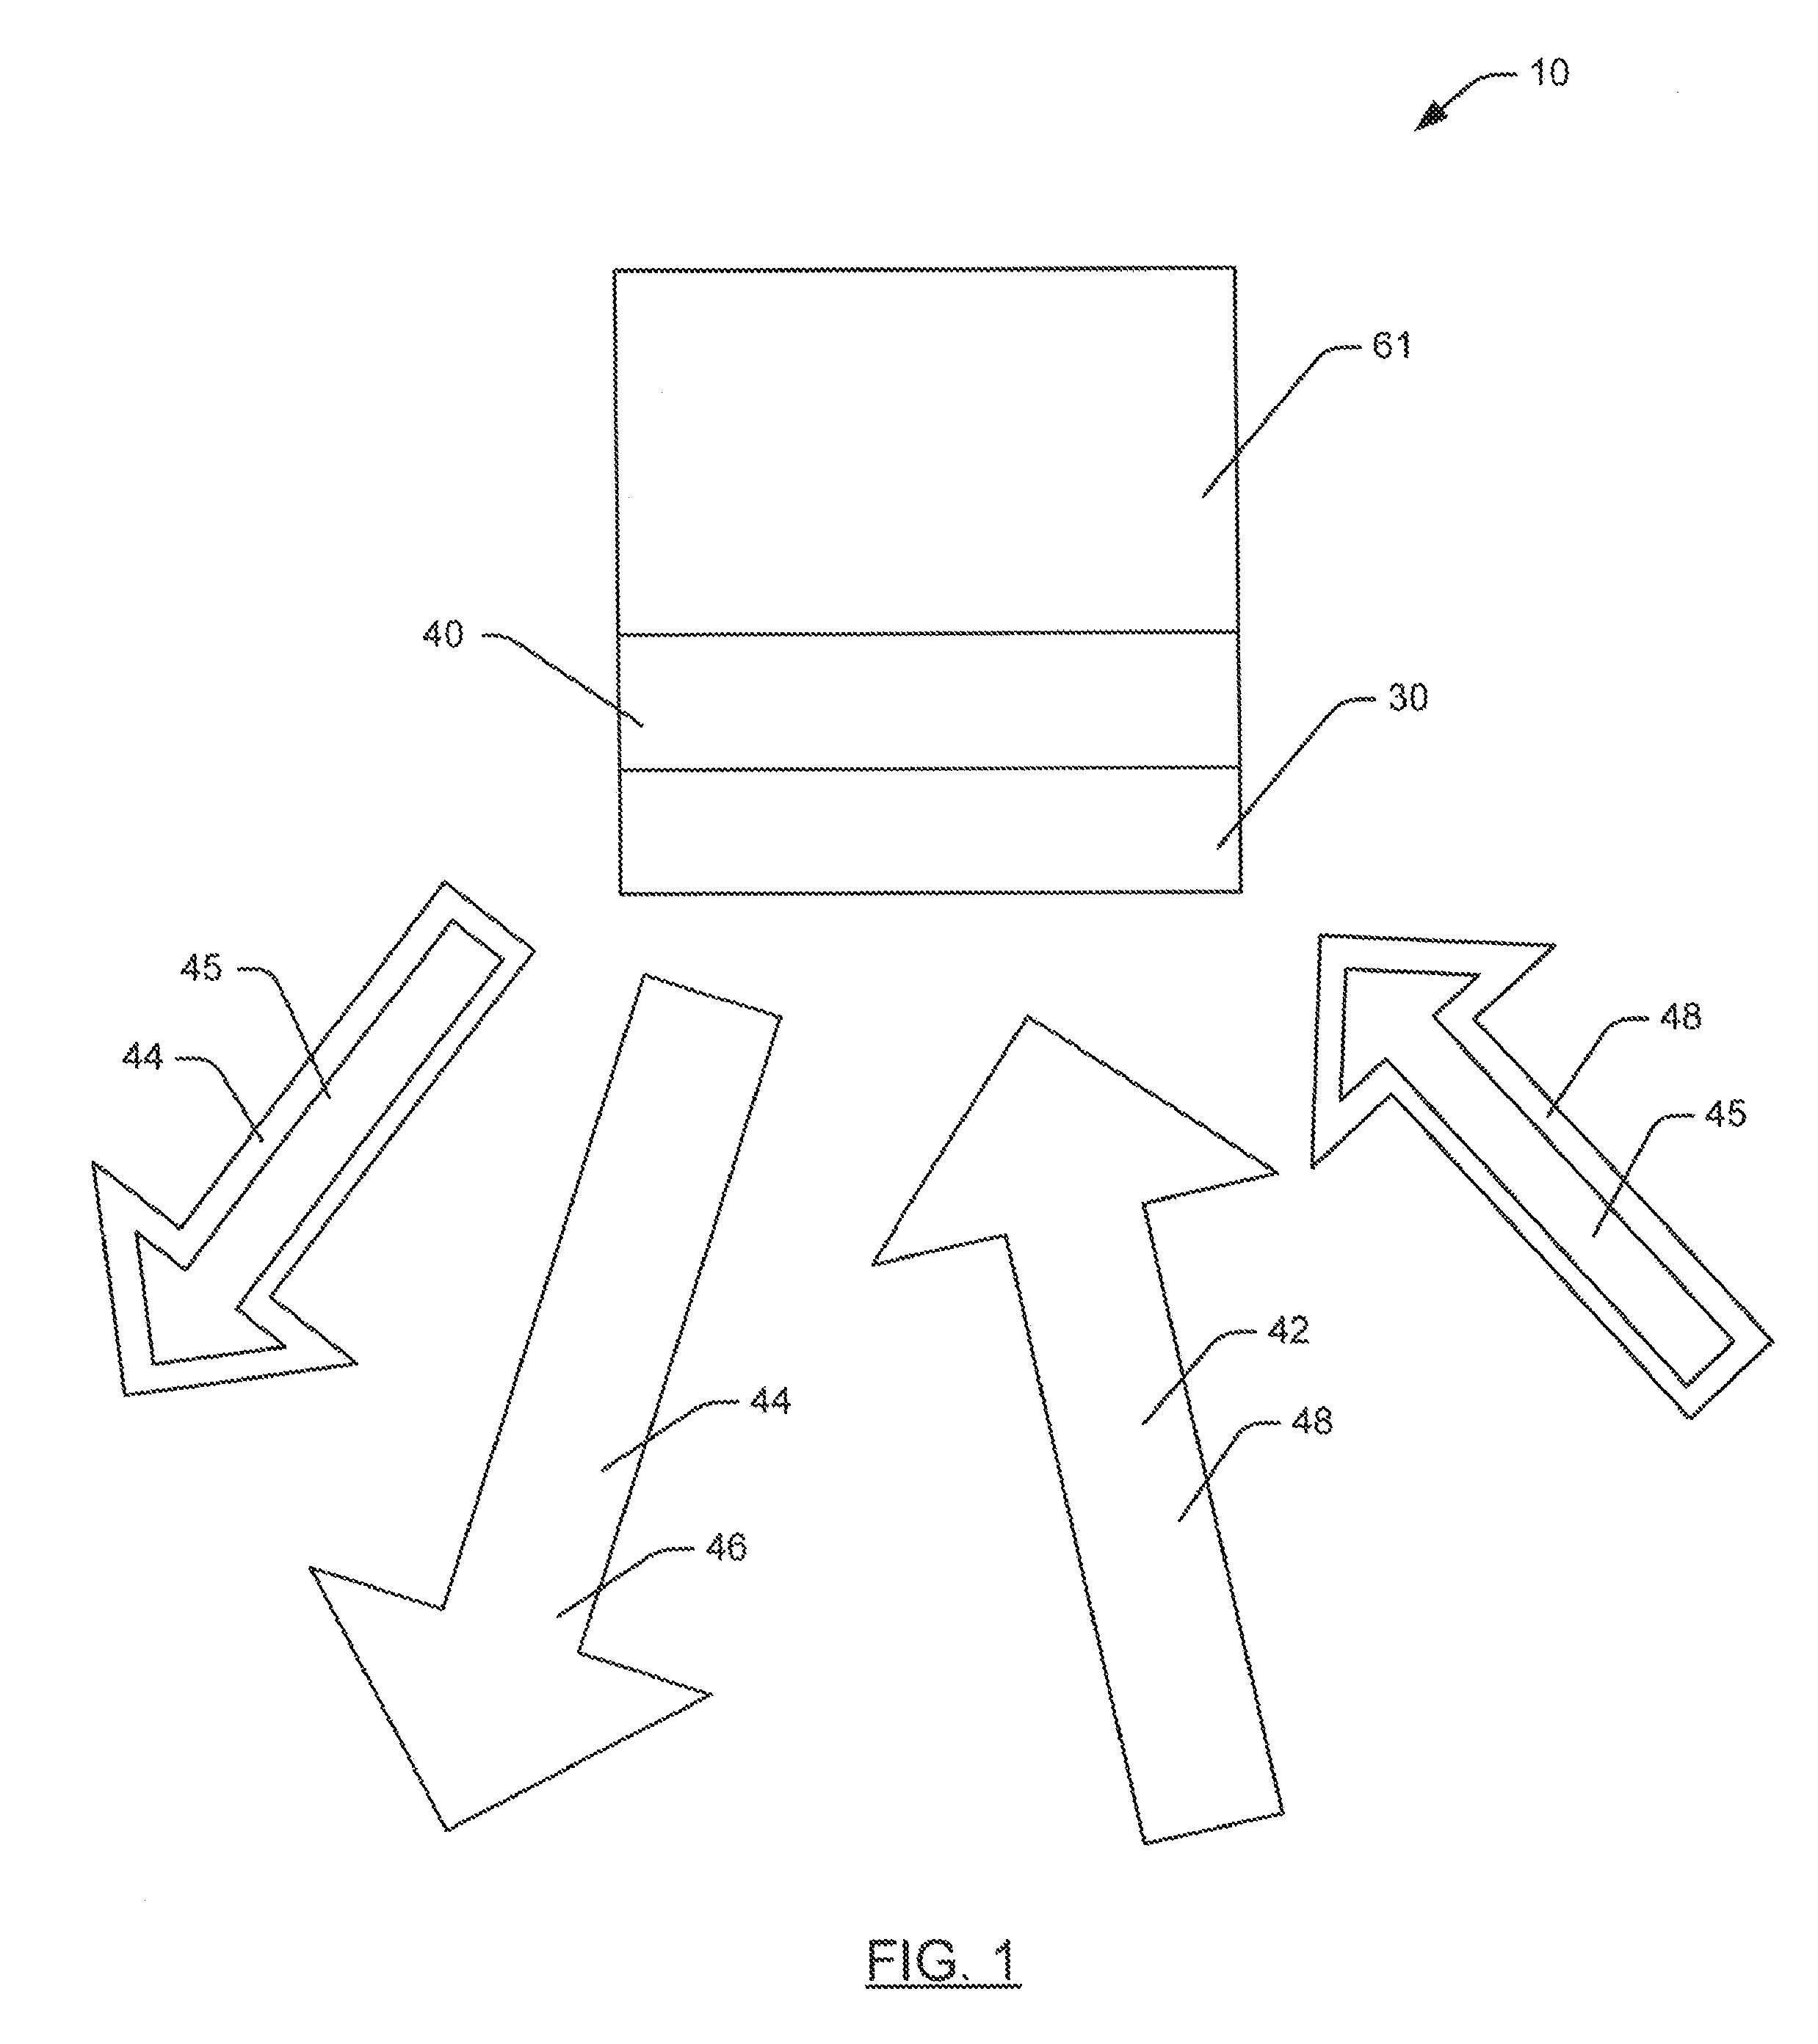 Wavelength sensing lighting system and associated methods for national security application